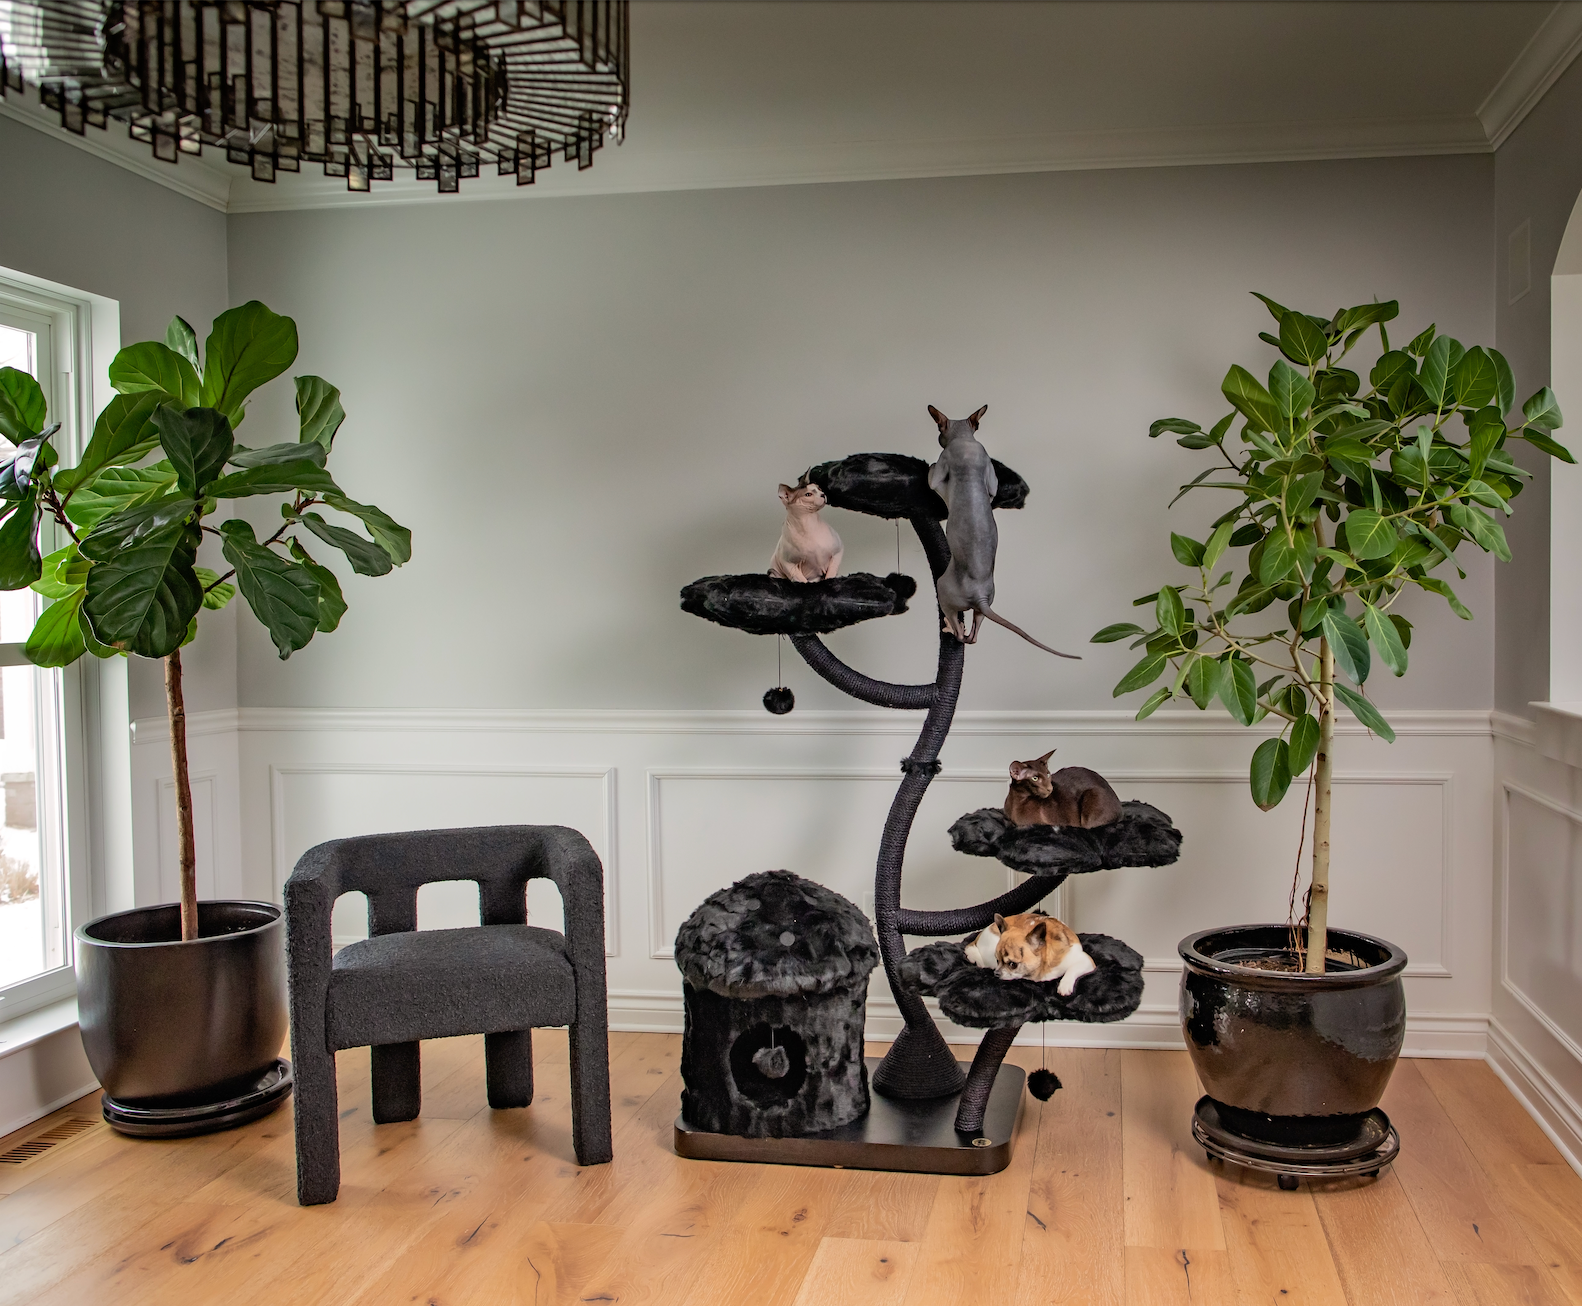 Teddy noir eden - Indoor cat tree surrounded by plants and mirror